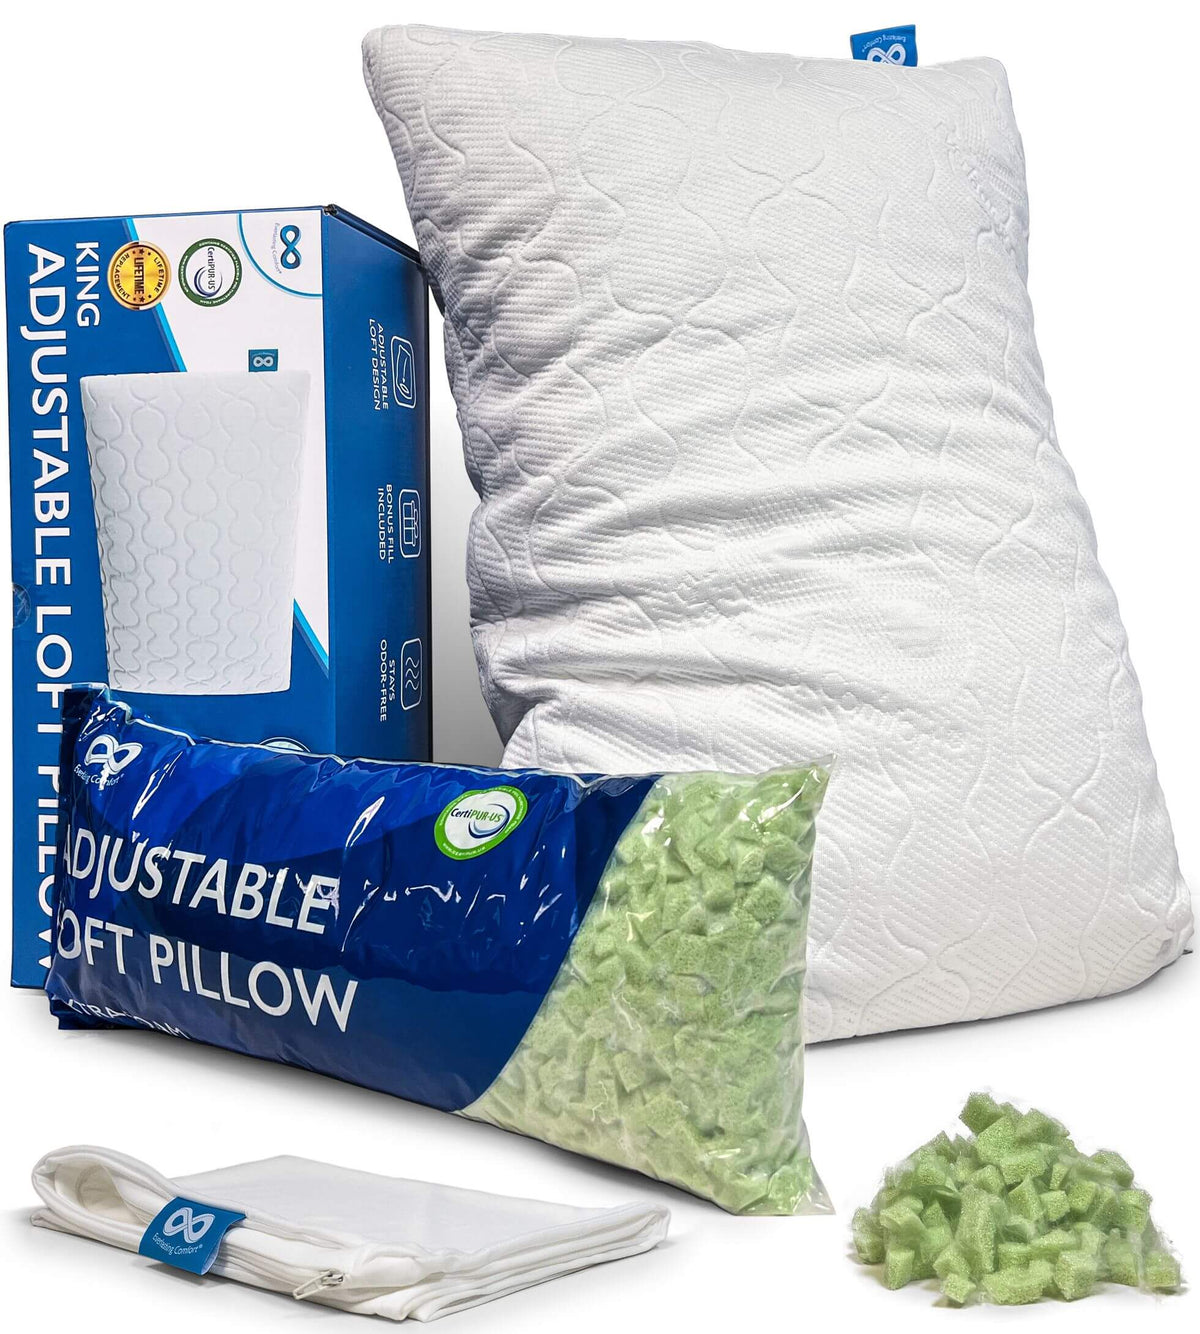 Everlasting Comfort Adjustable Pillow for Back, Stomach, Side Sleepers -  Green Tea Shredded Memory Foam Pillows with Customizable Loft 